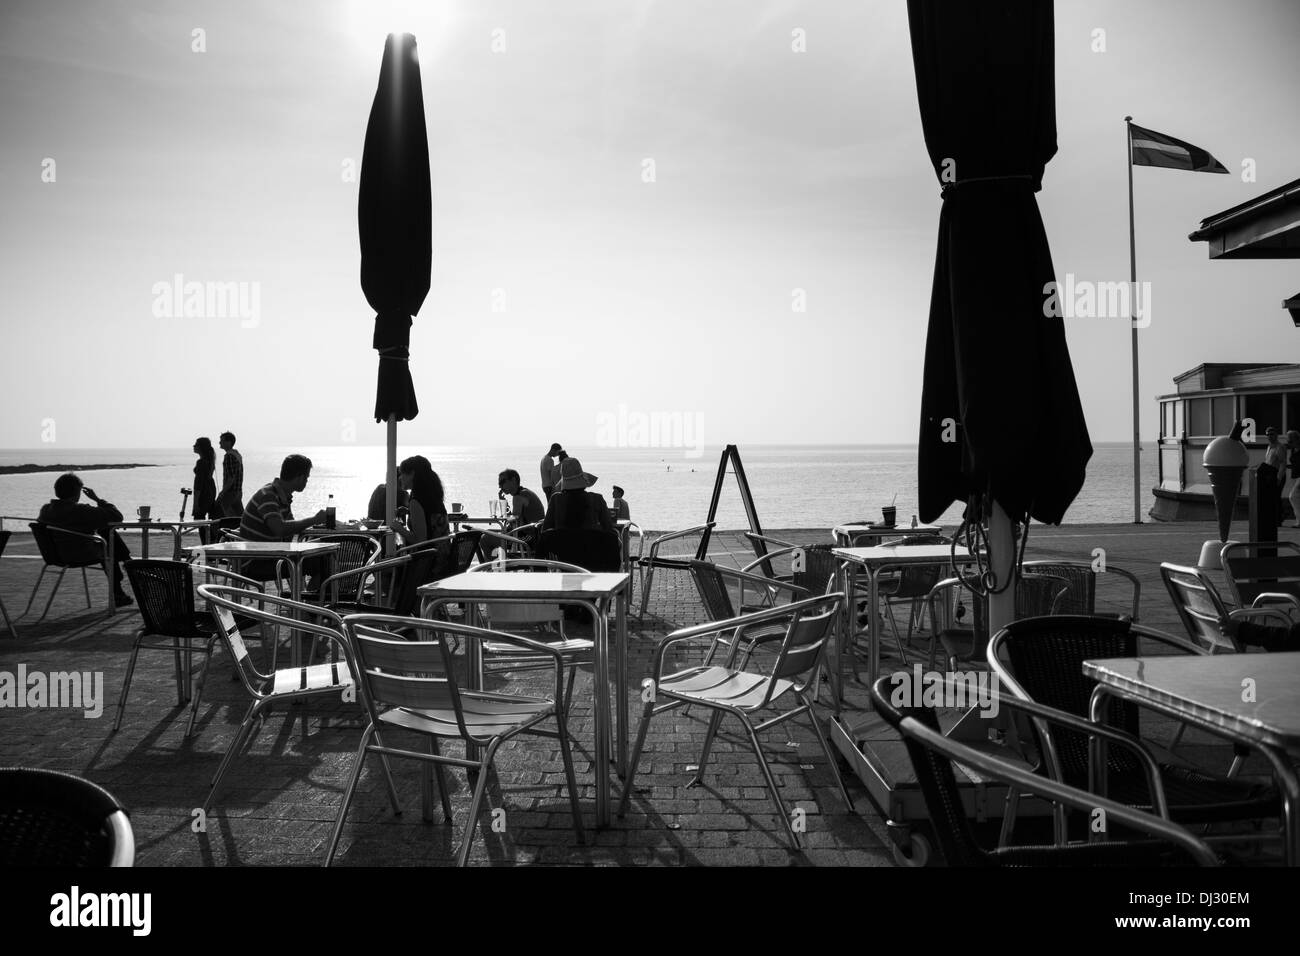 Early evening at a cafe on the Promenade Stock Photo